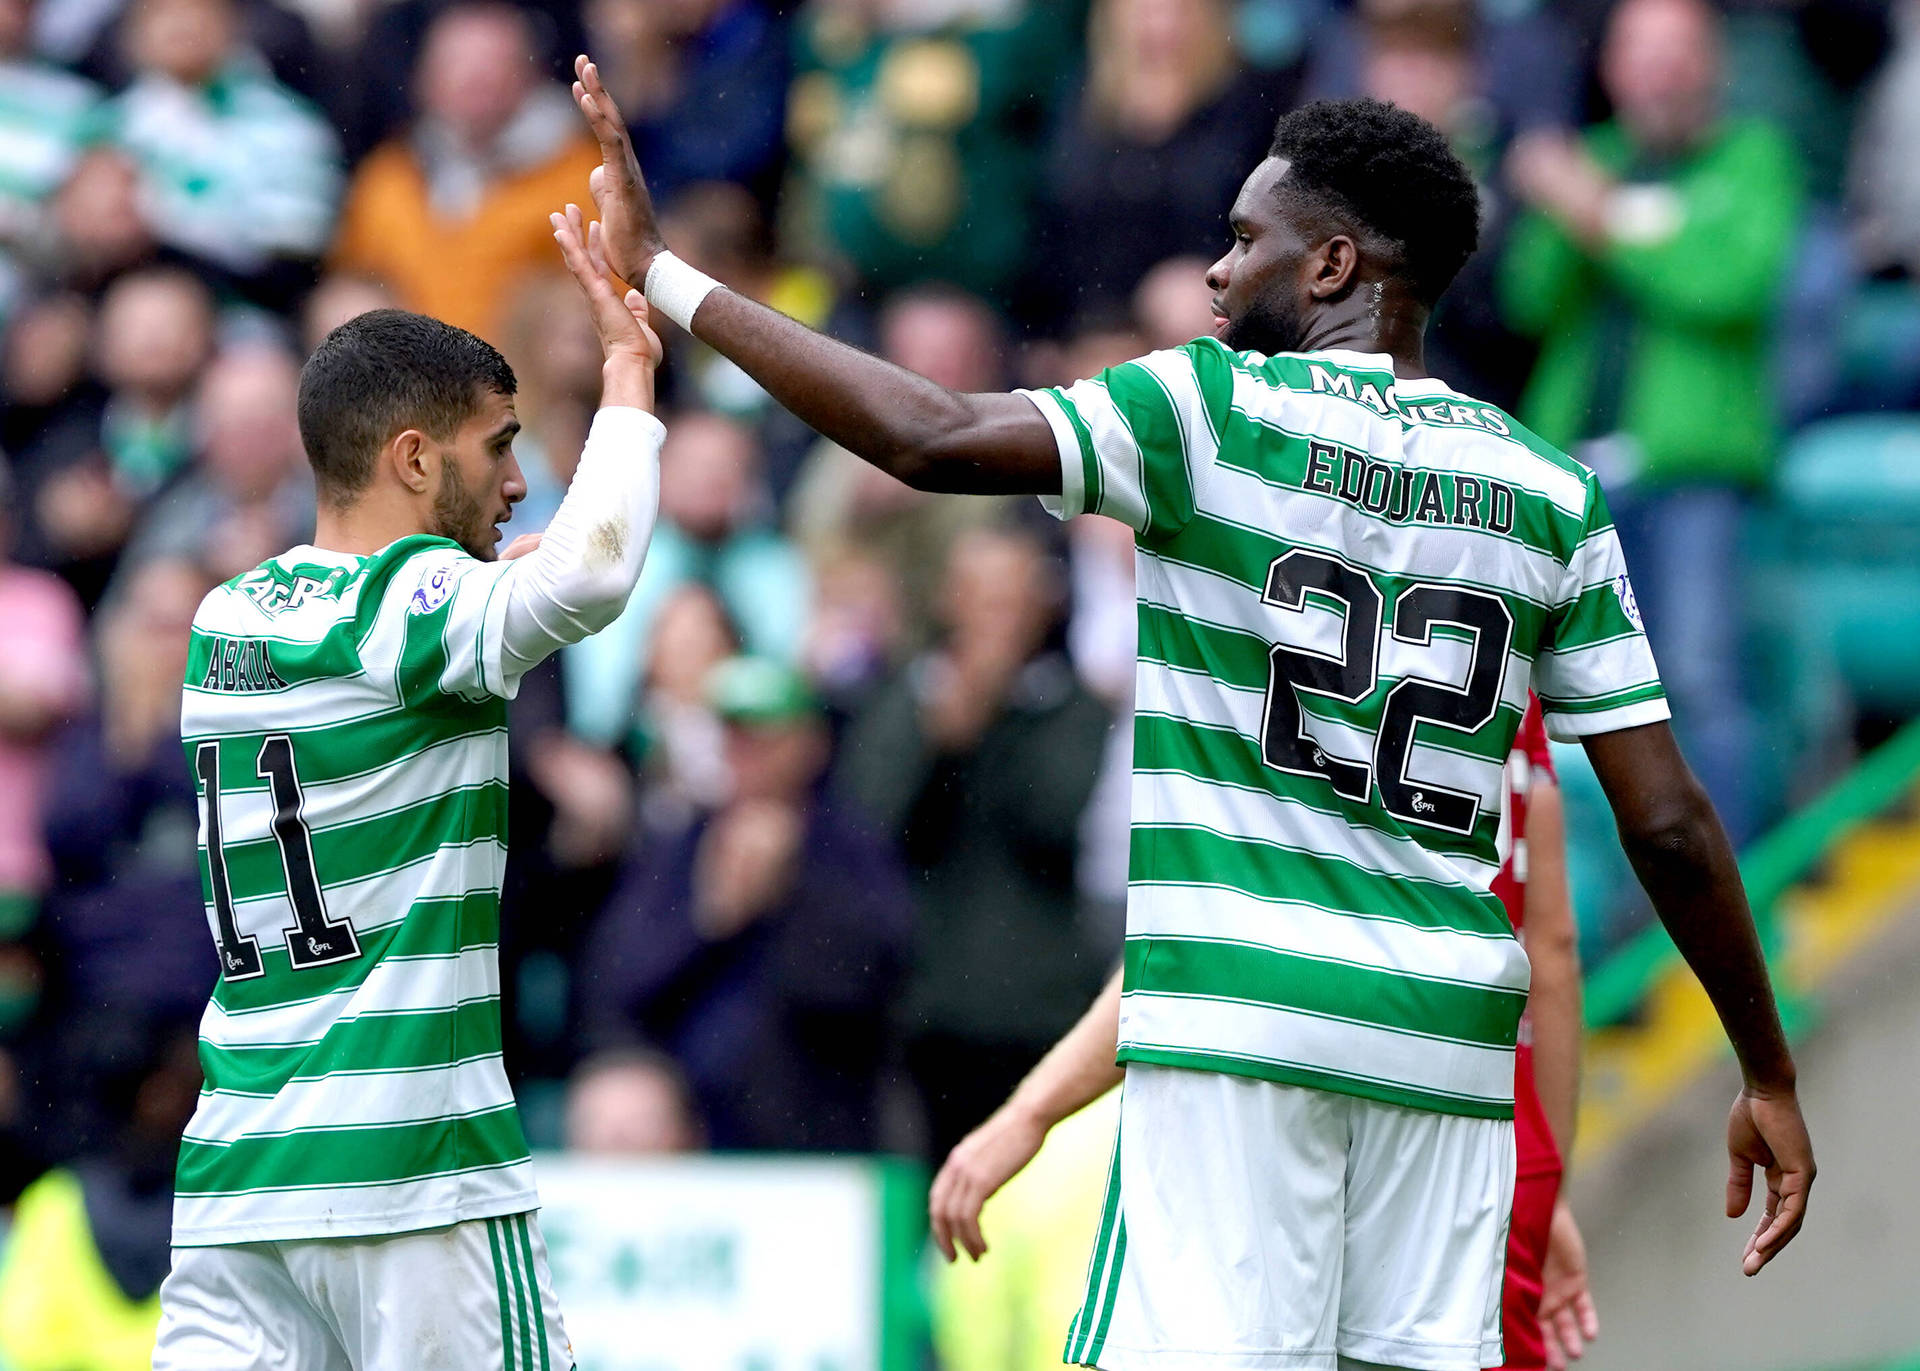 Odsonne Edouard High Five With Teammate Wallpaper